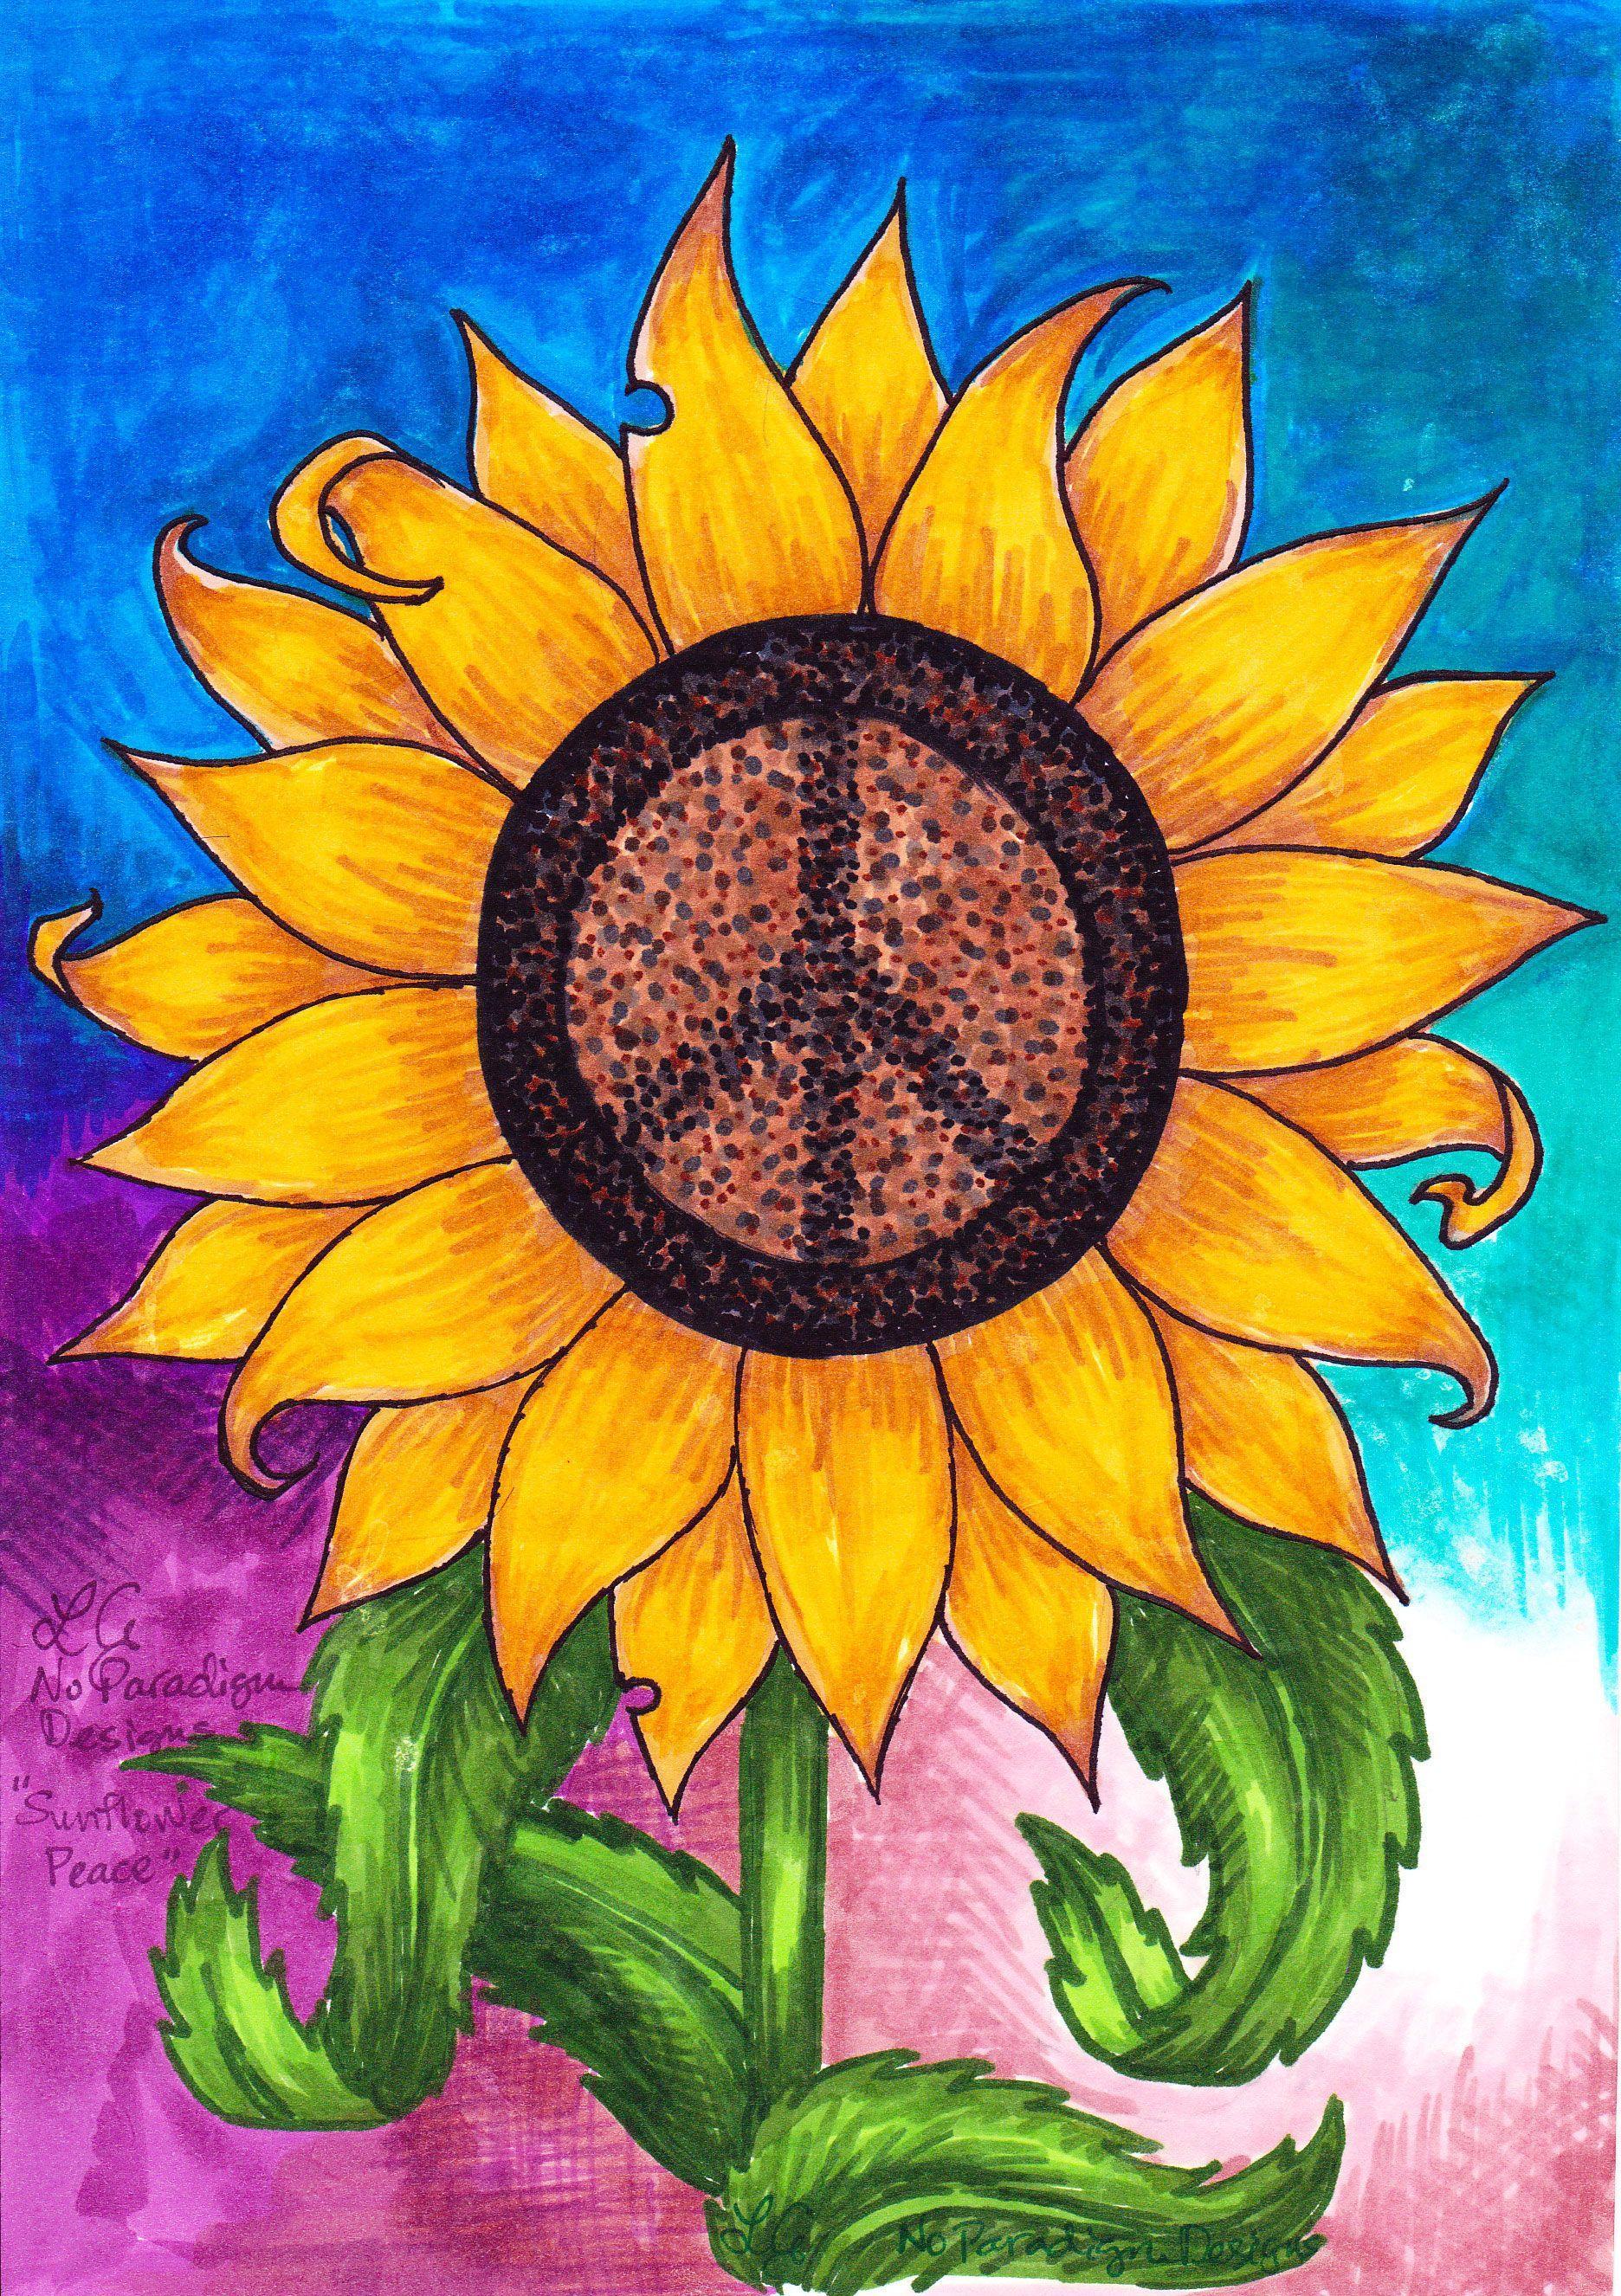 Hippie Love Logo - This sunflower peace sign is another classic No Paradigm Designs